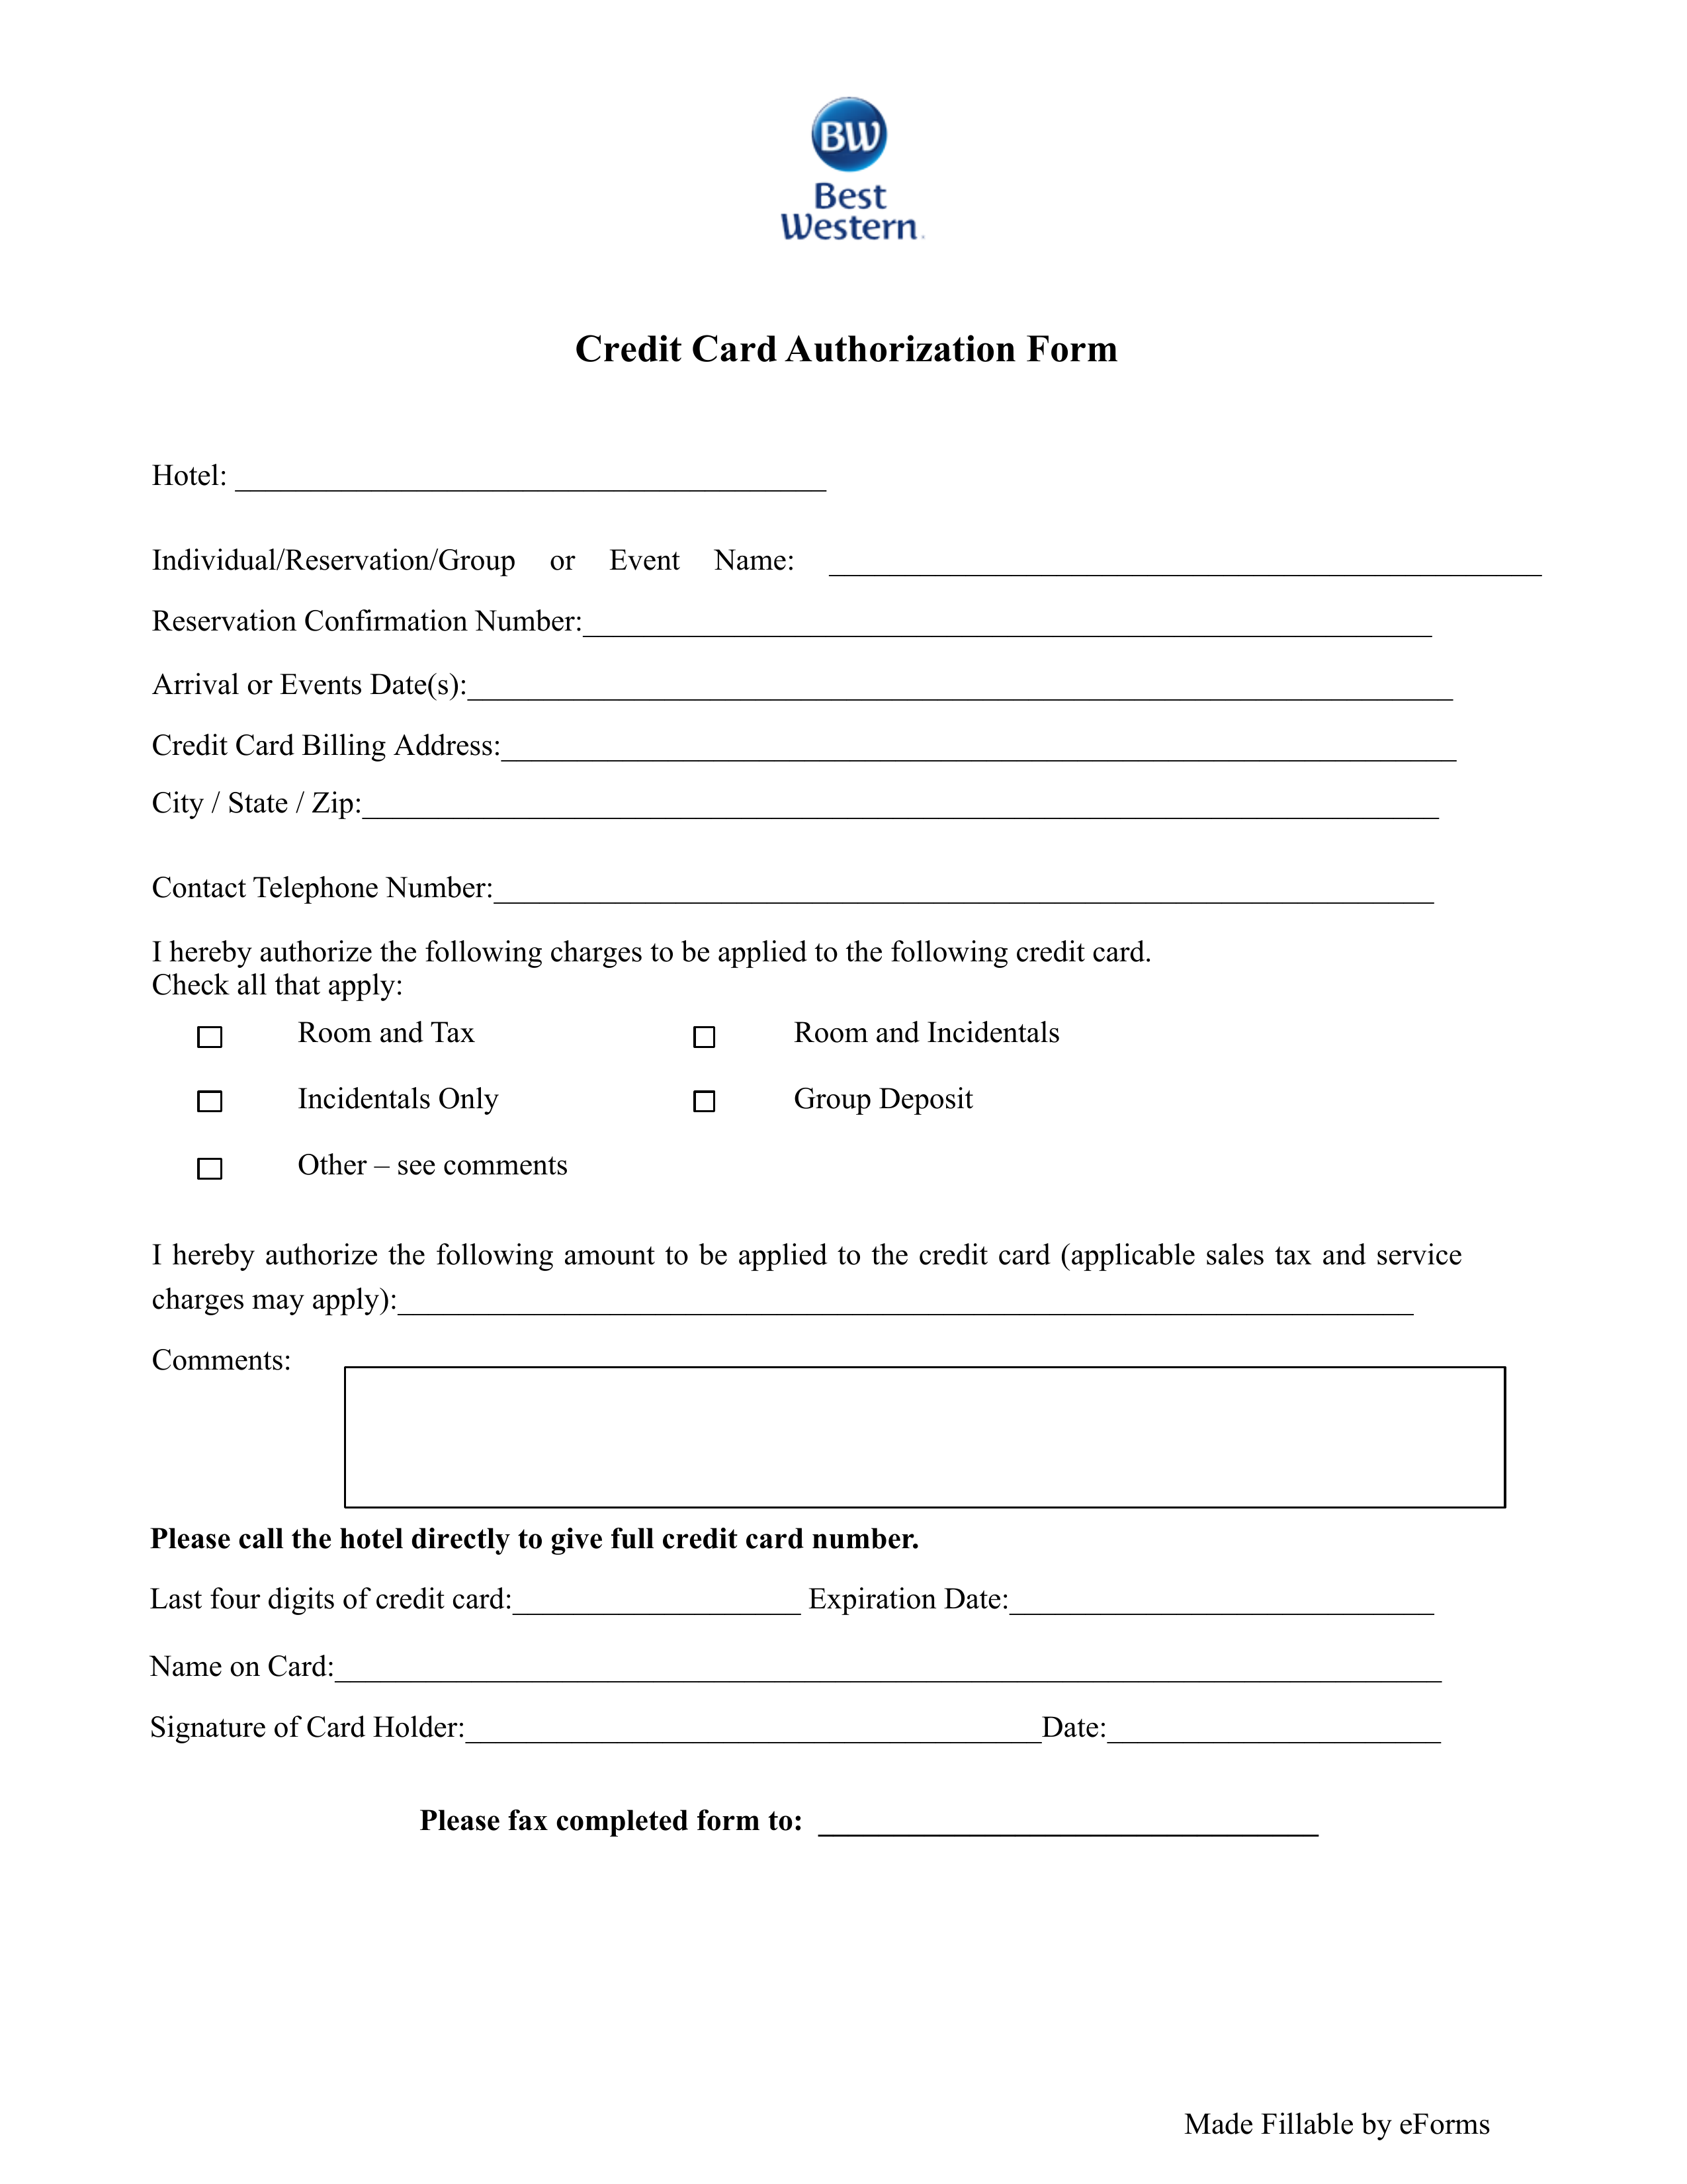 Free Best Western Hotel Credit Card Authorization Form